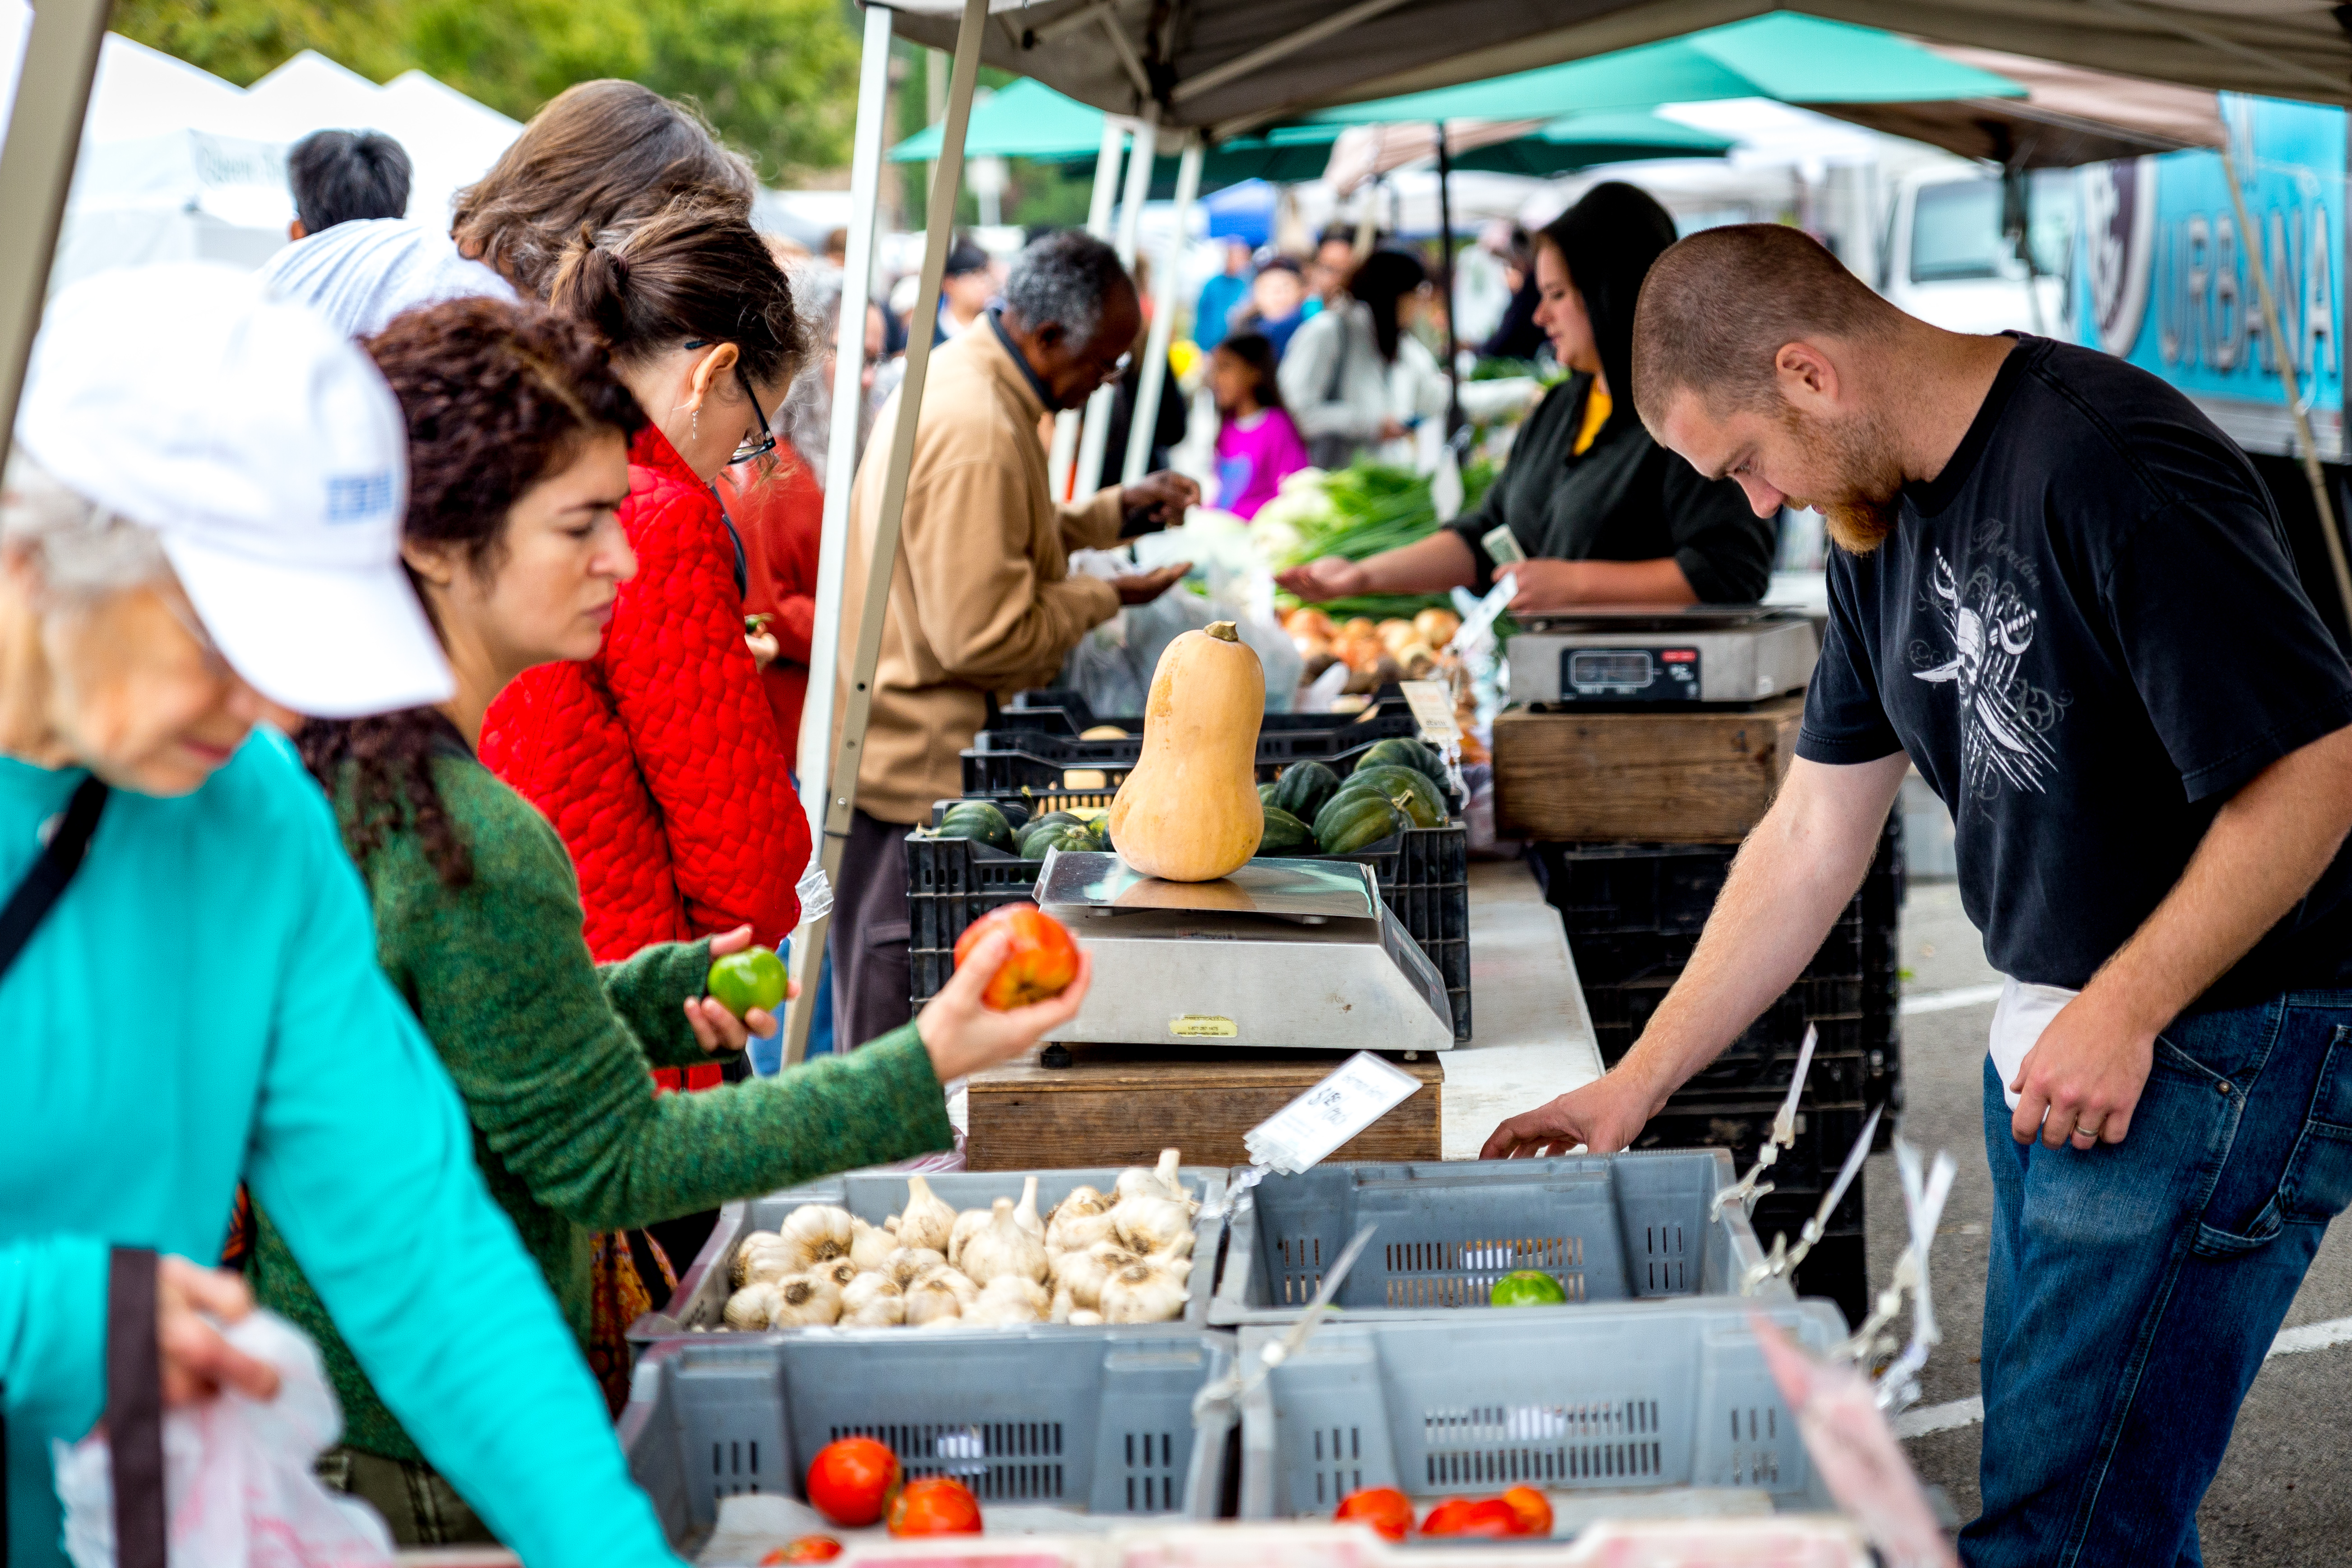 People shopping at a farmers market in the Champaign-Urbana area